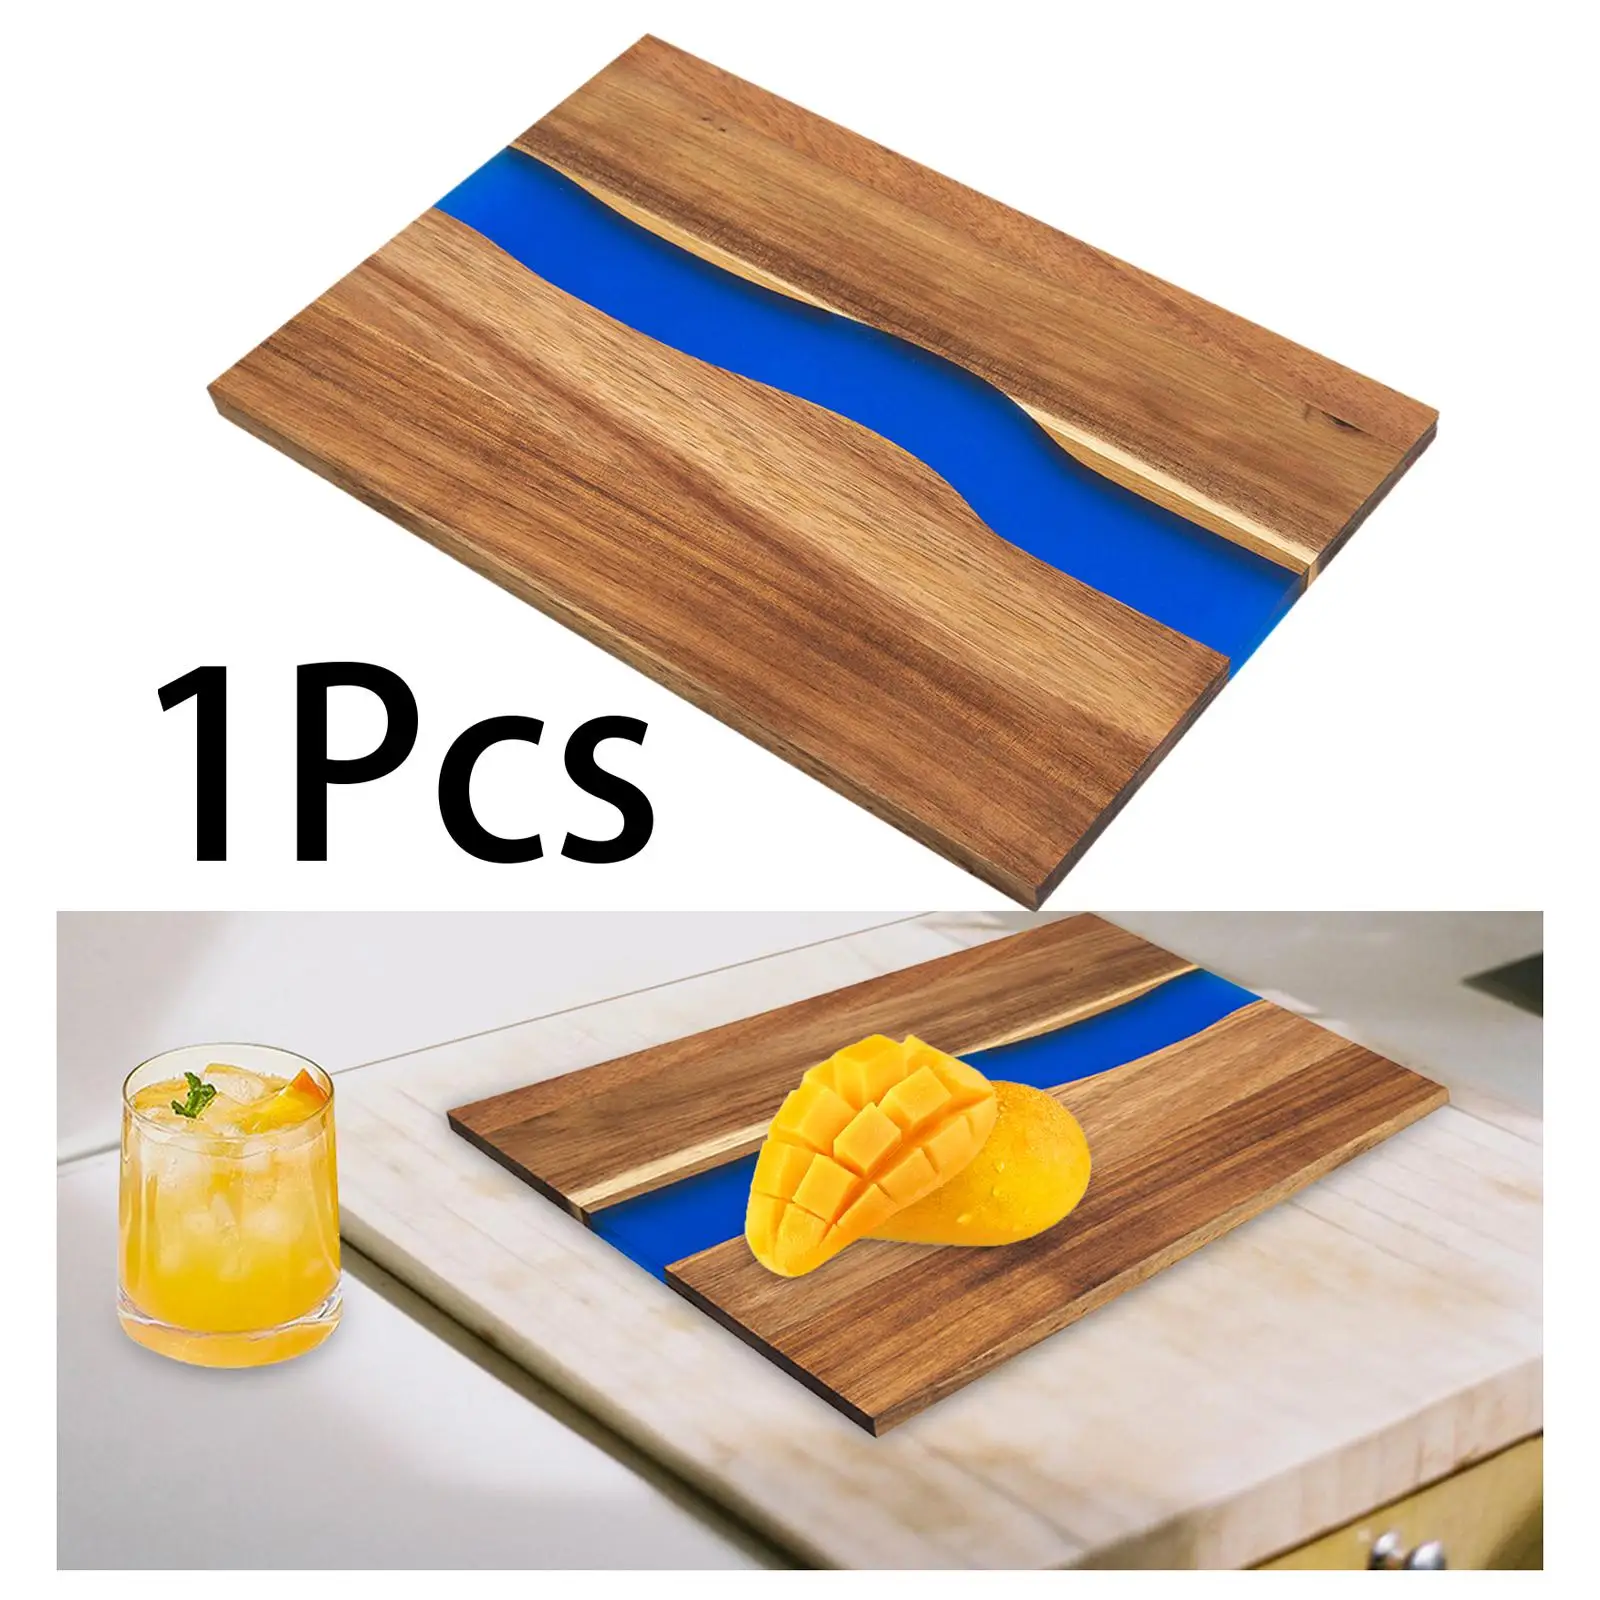 Cheese Board with Resin Portable Heavy Duty Multipurpose Chopping Board Pizza Board for Fruits Tapas Sushi Bread Appetizers